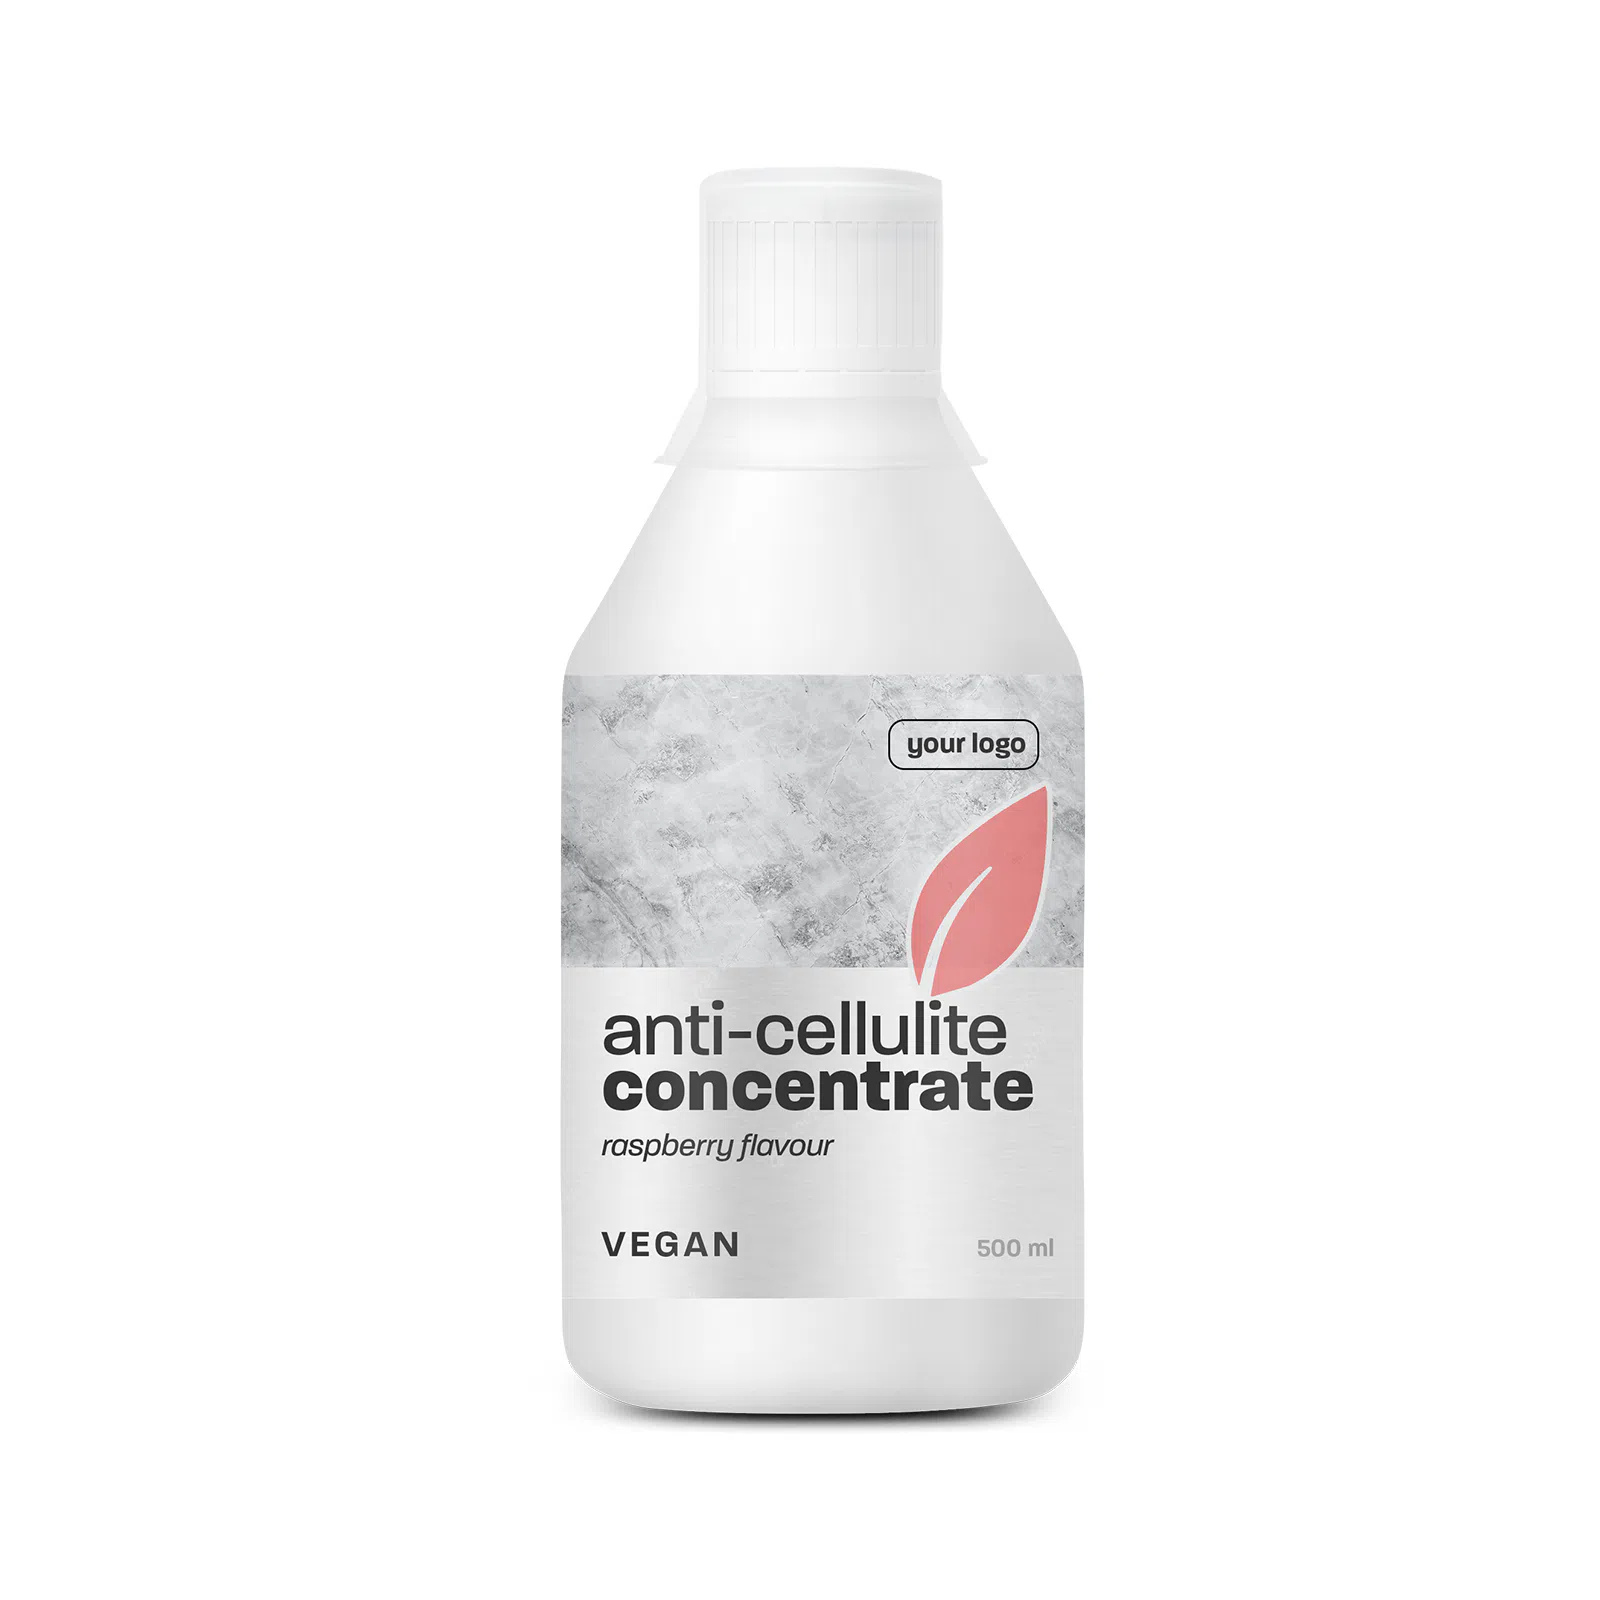 Amerparma private label functional concentrates anti-cellulite flavour raspberry, suitable for vegan, in pet bottle 500 ml